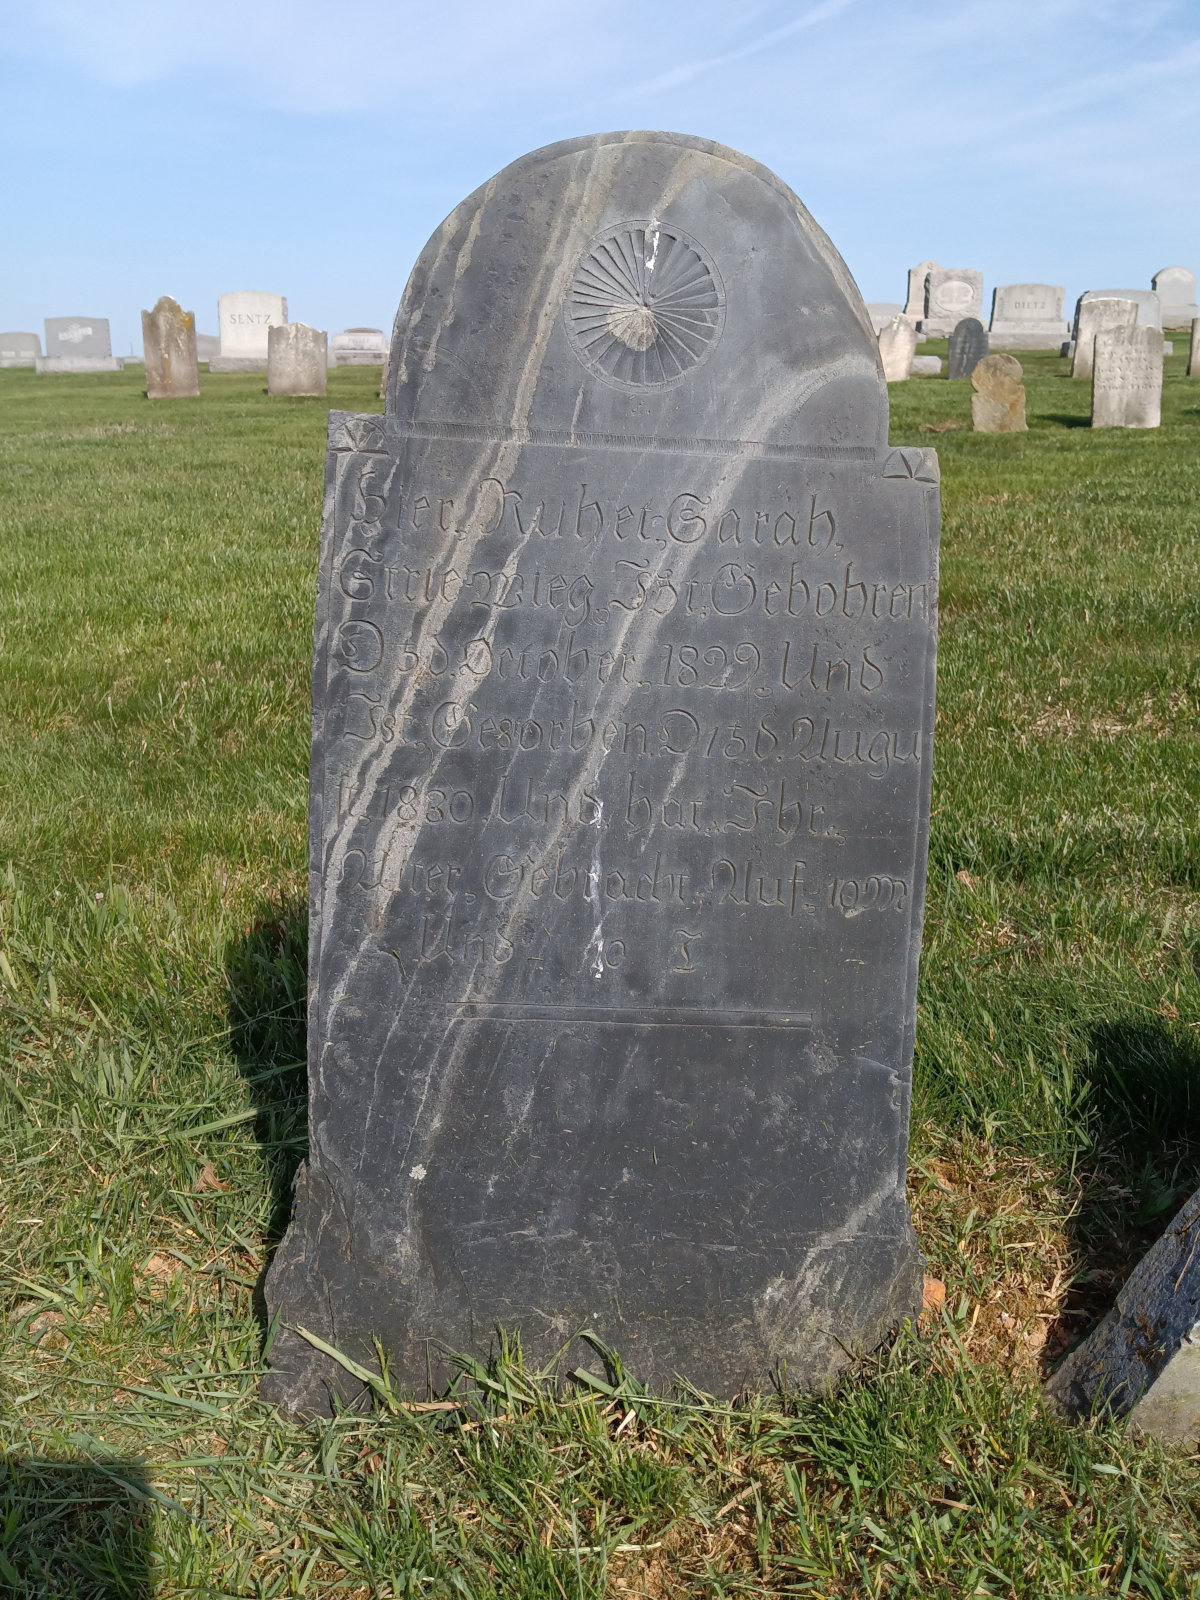 Early 19th-century headstone at Freysville Cemetery, carved in German